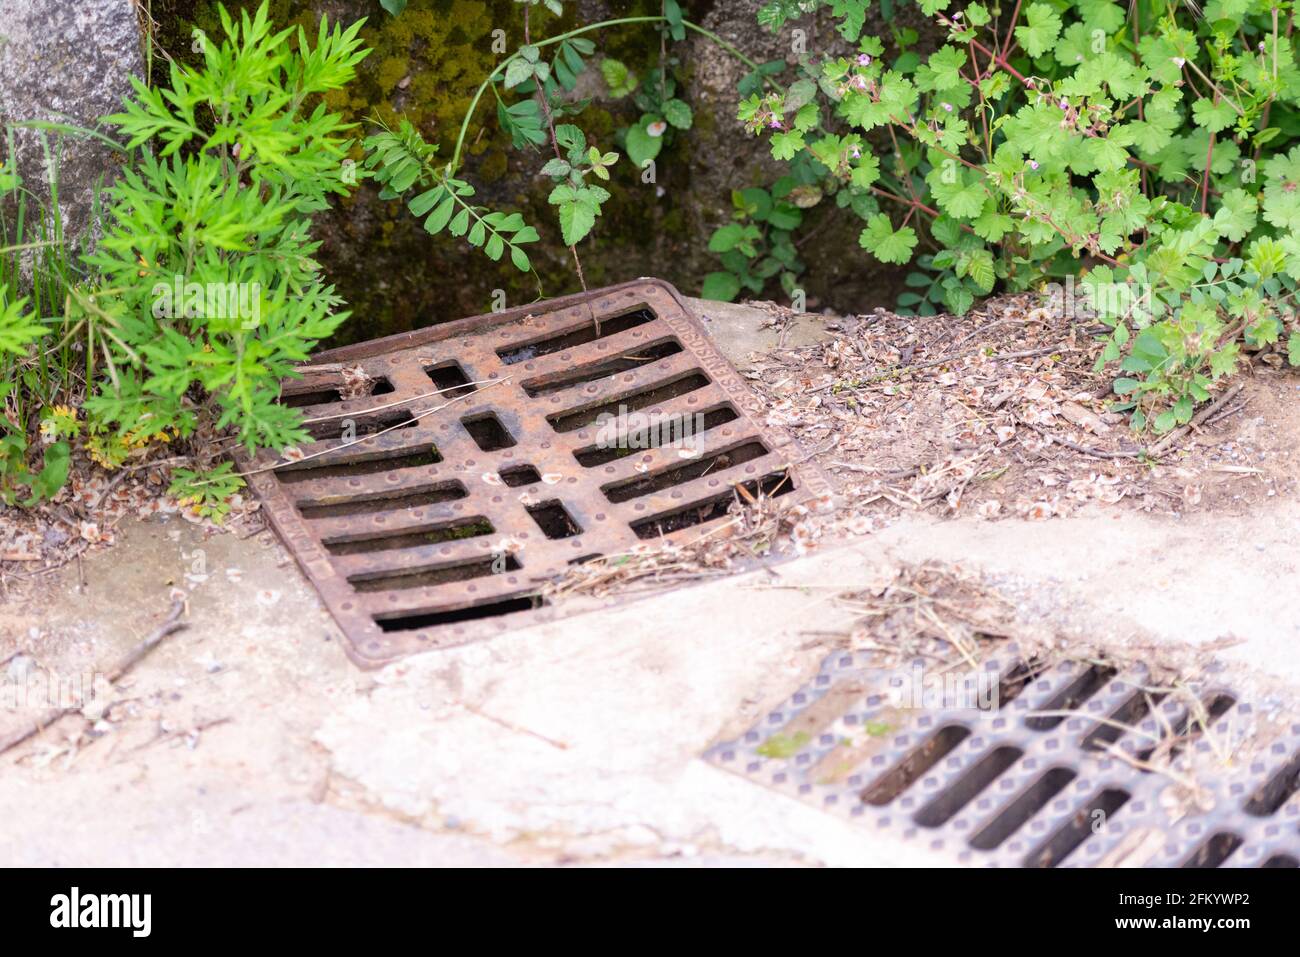 Storm grates on the village road. Metal grilles for collecting rainwater from the road. Stock Photo